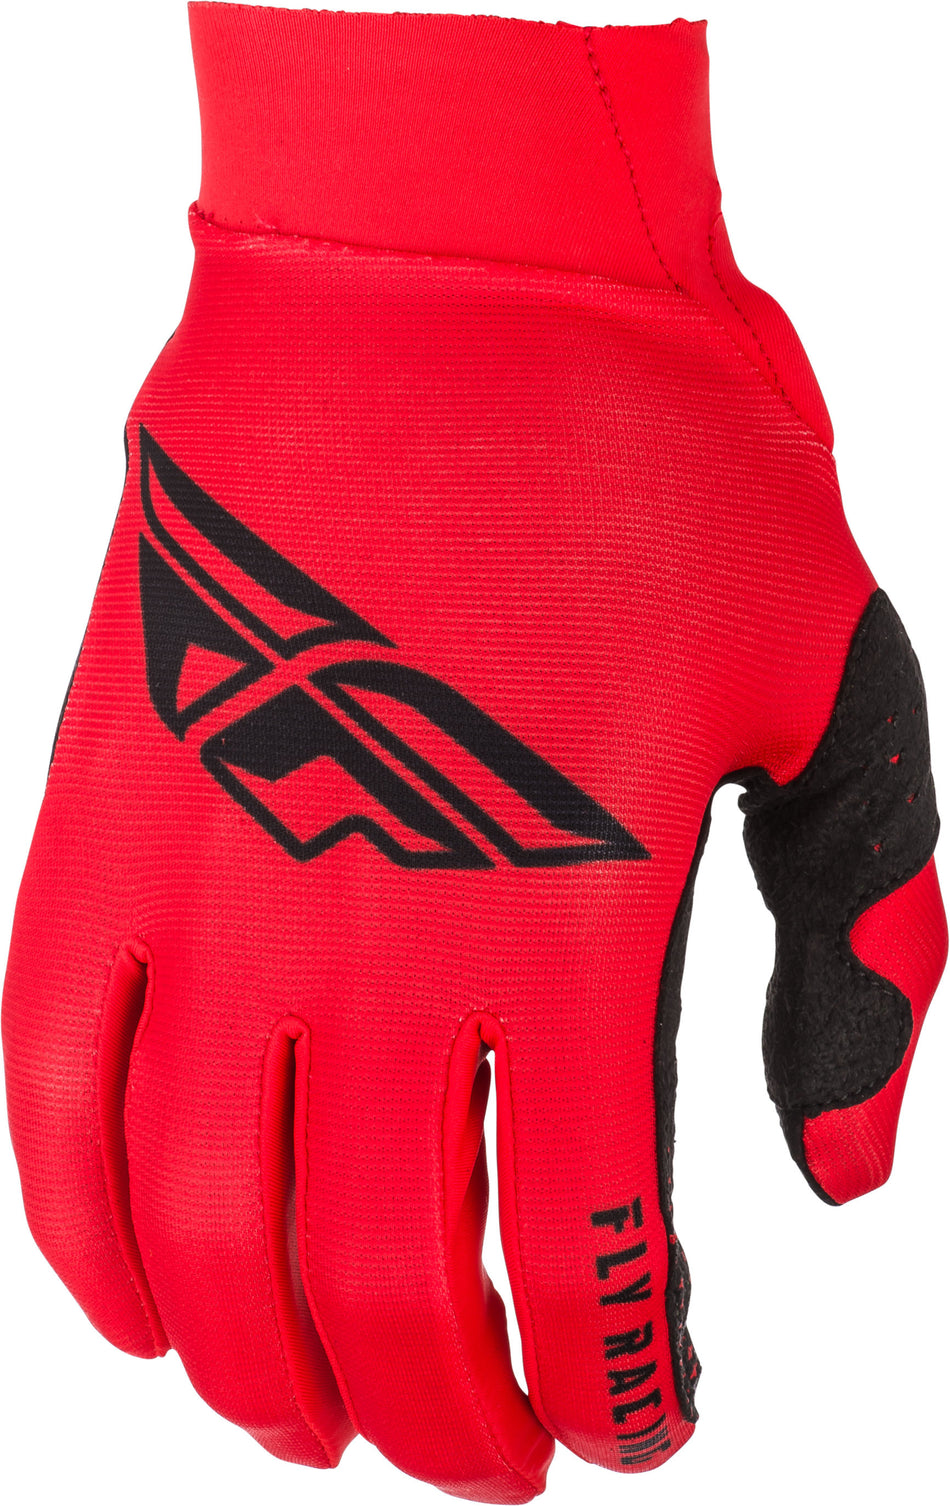 FLY RACING Pro Lite Gloves Red/Black Sz 07 372-81207